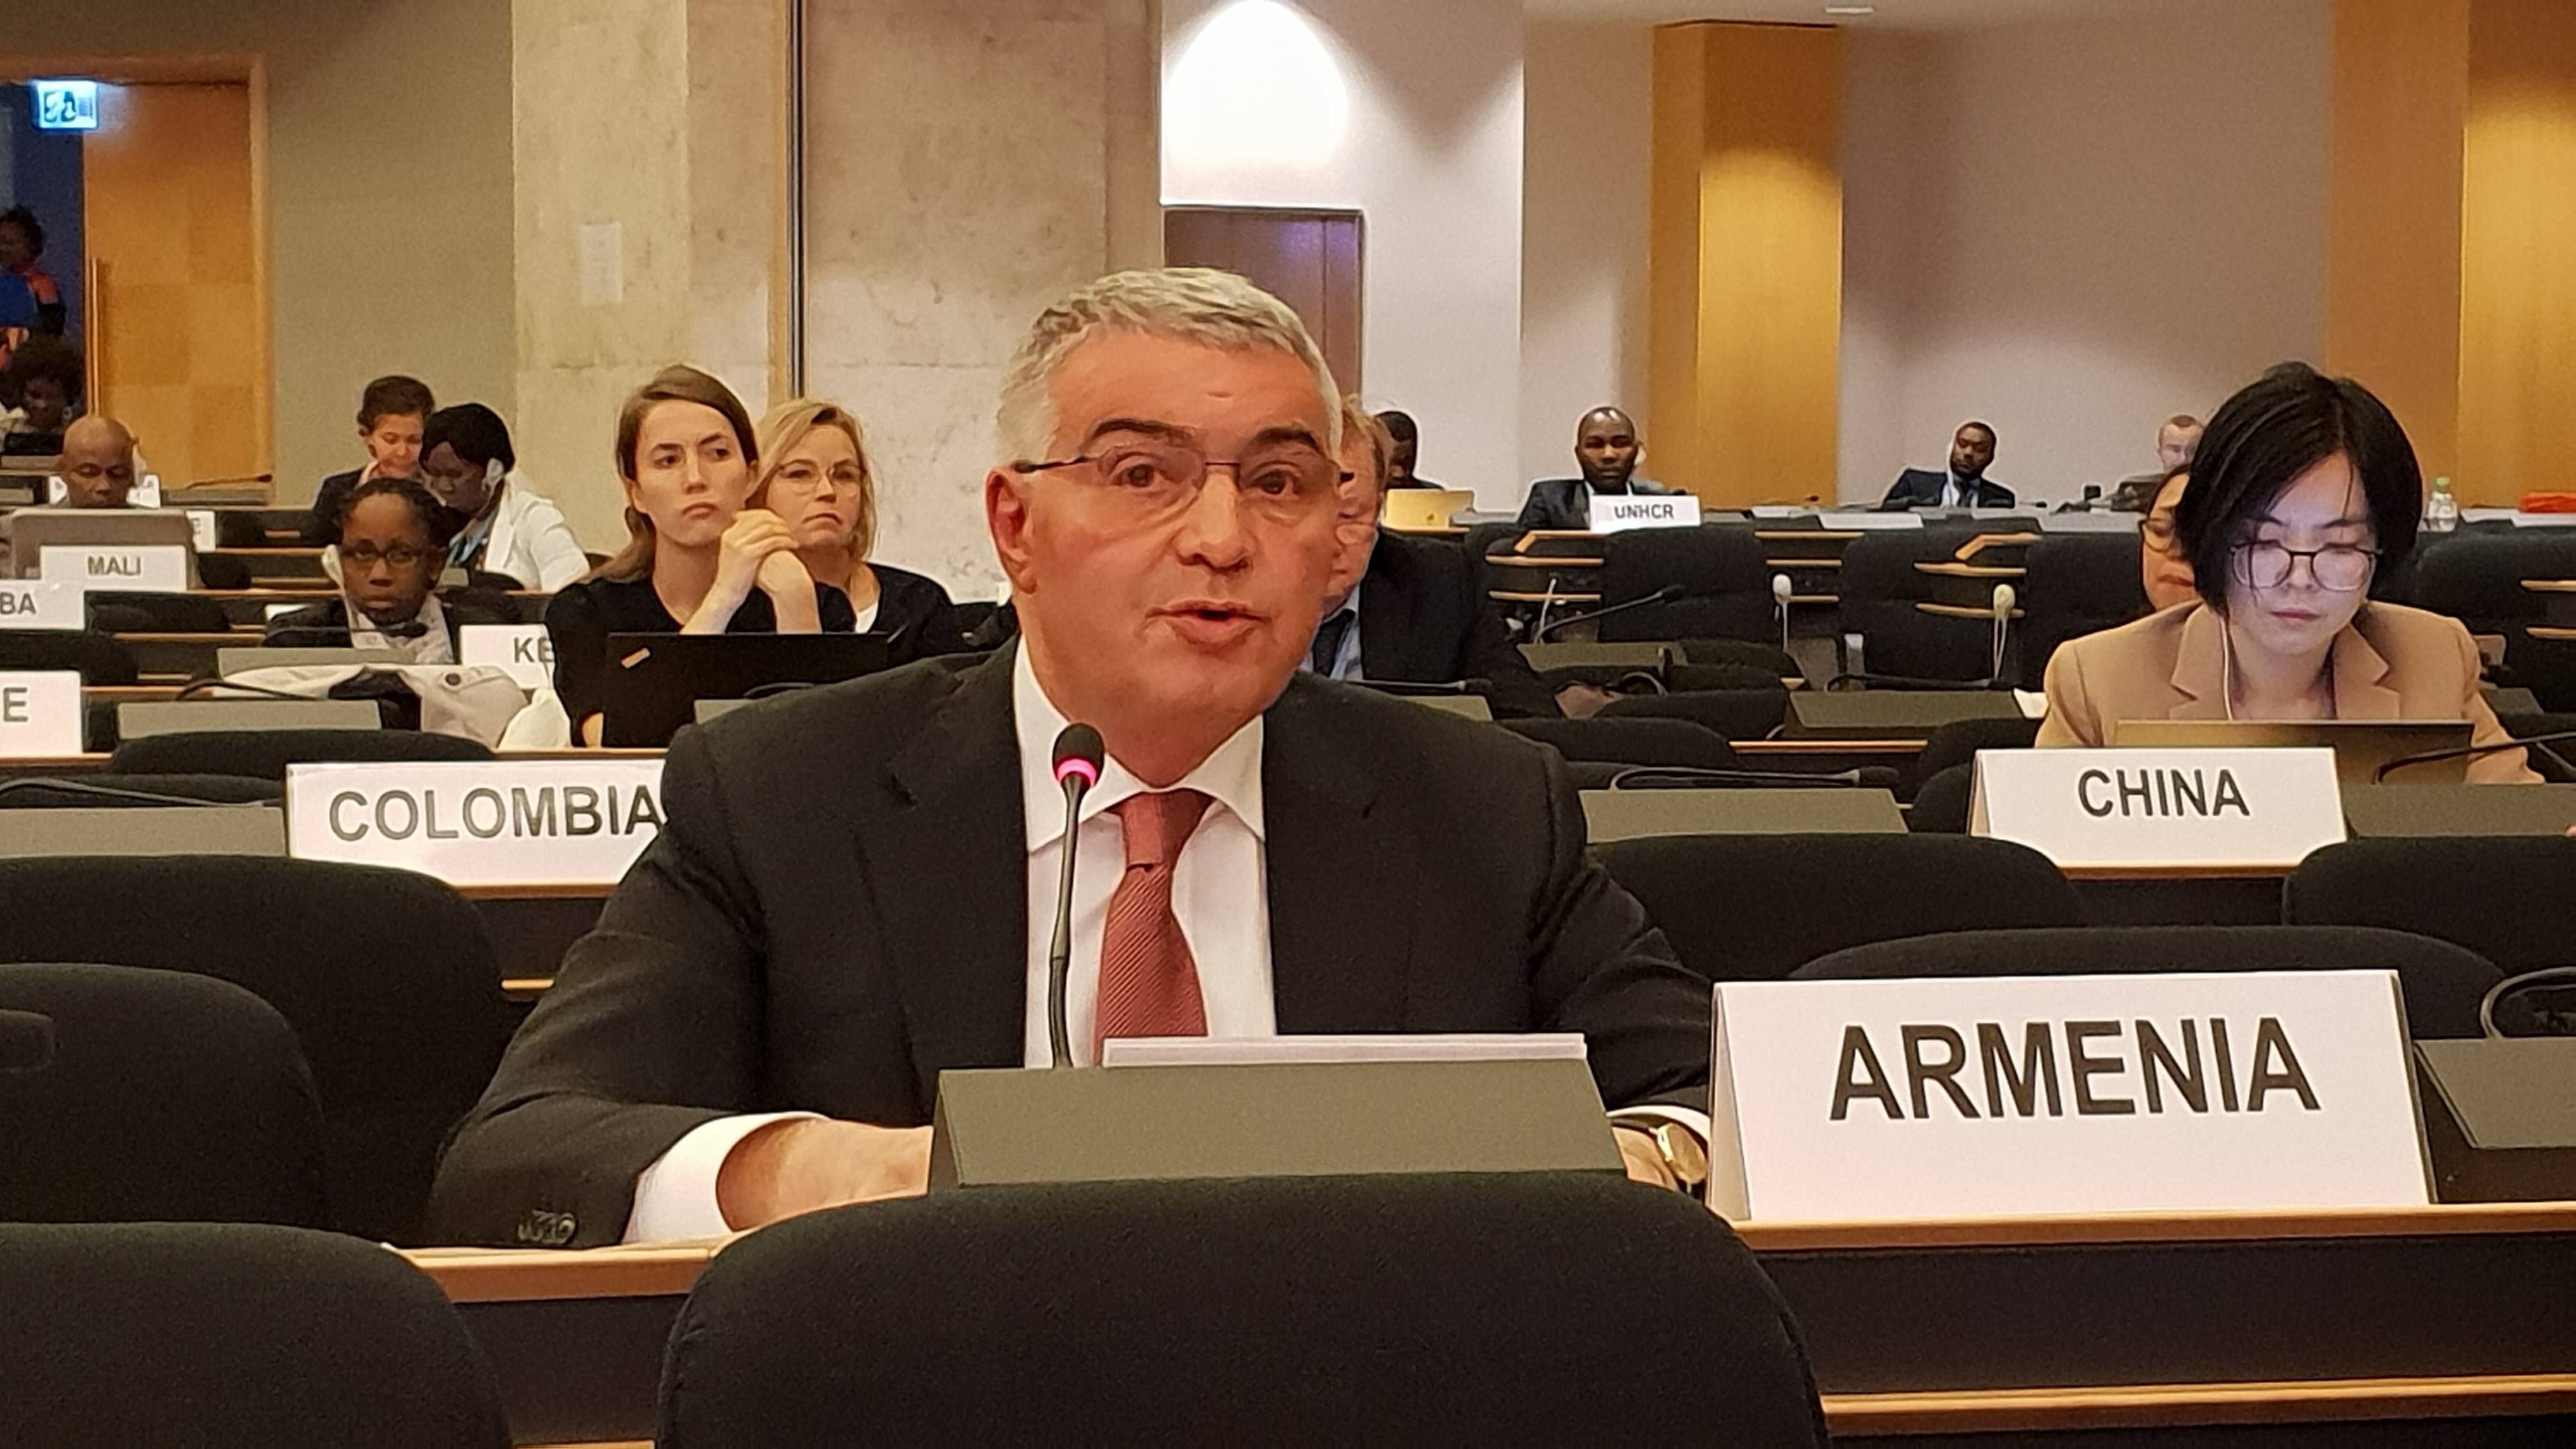 Deputy Foreign Minister of Armenia Ashot Hovakimian took part in the 69th session of the Executive Committee of the UNHCR’s Programme